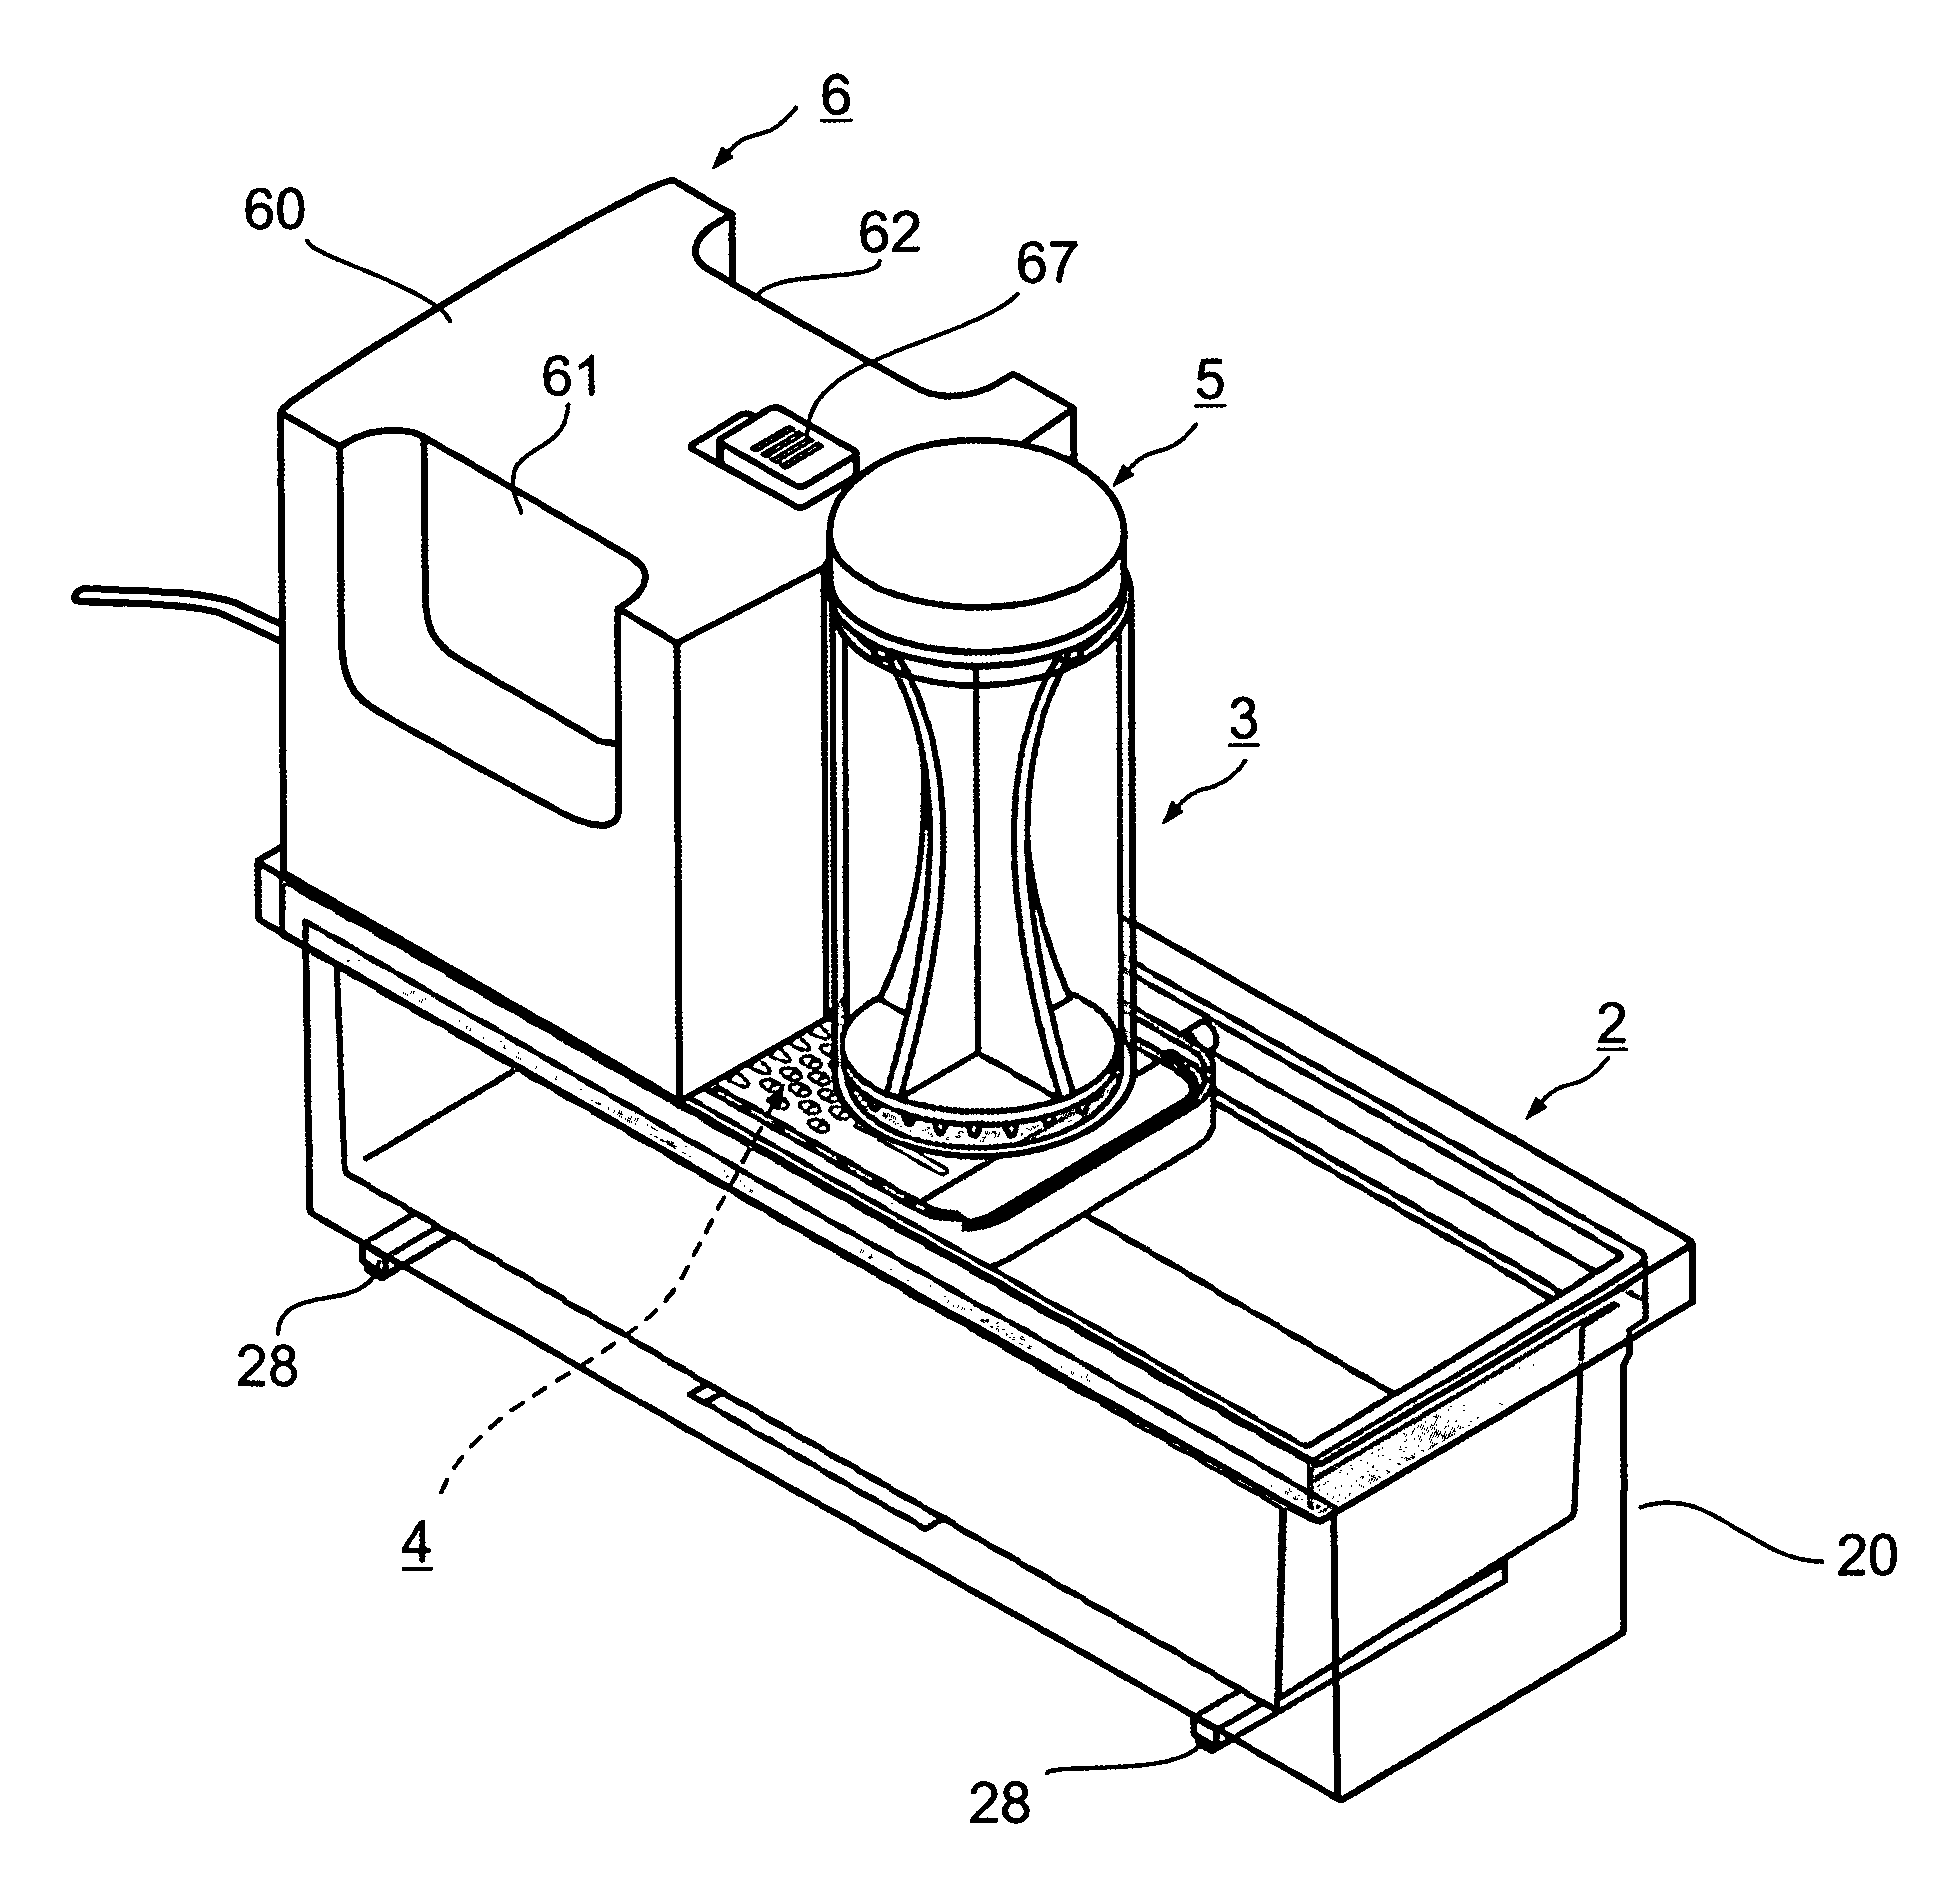 Food processor appliance for cutting food articles into desired forms